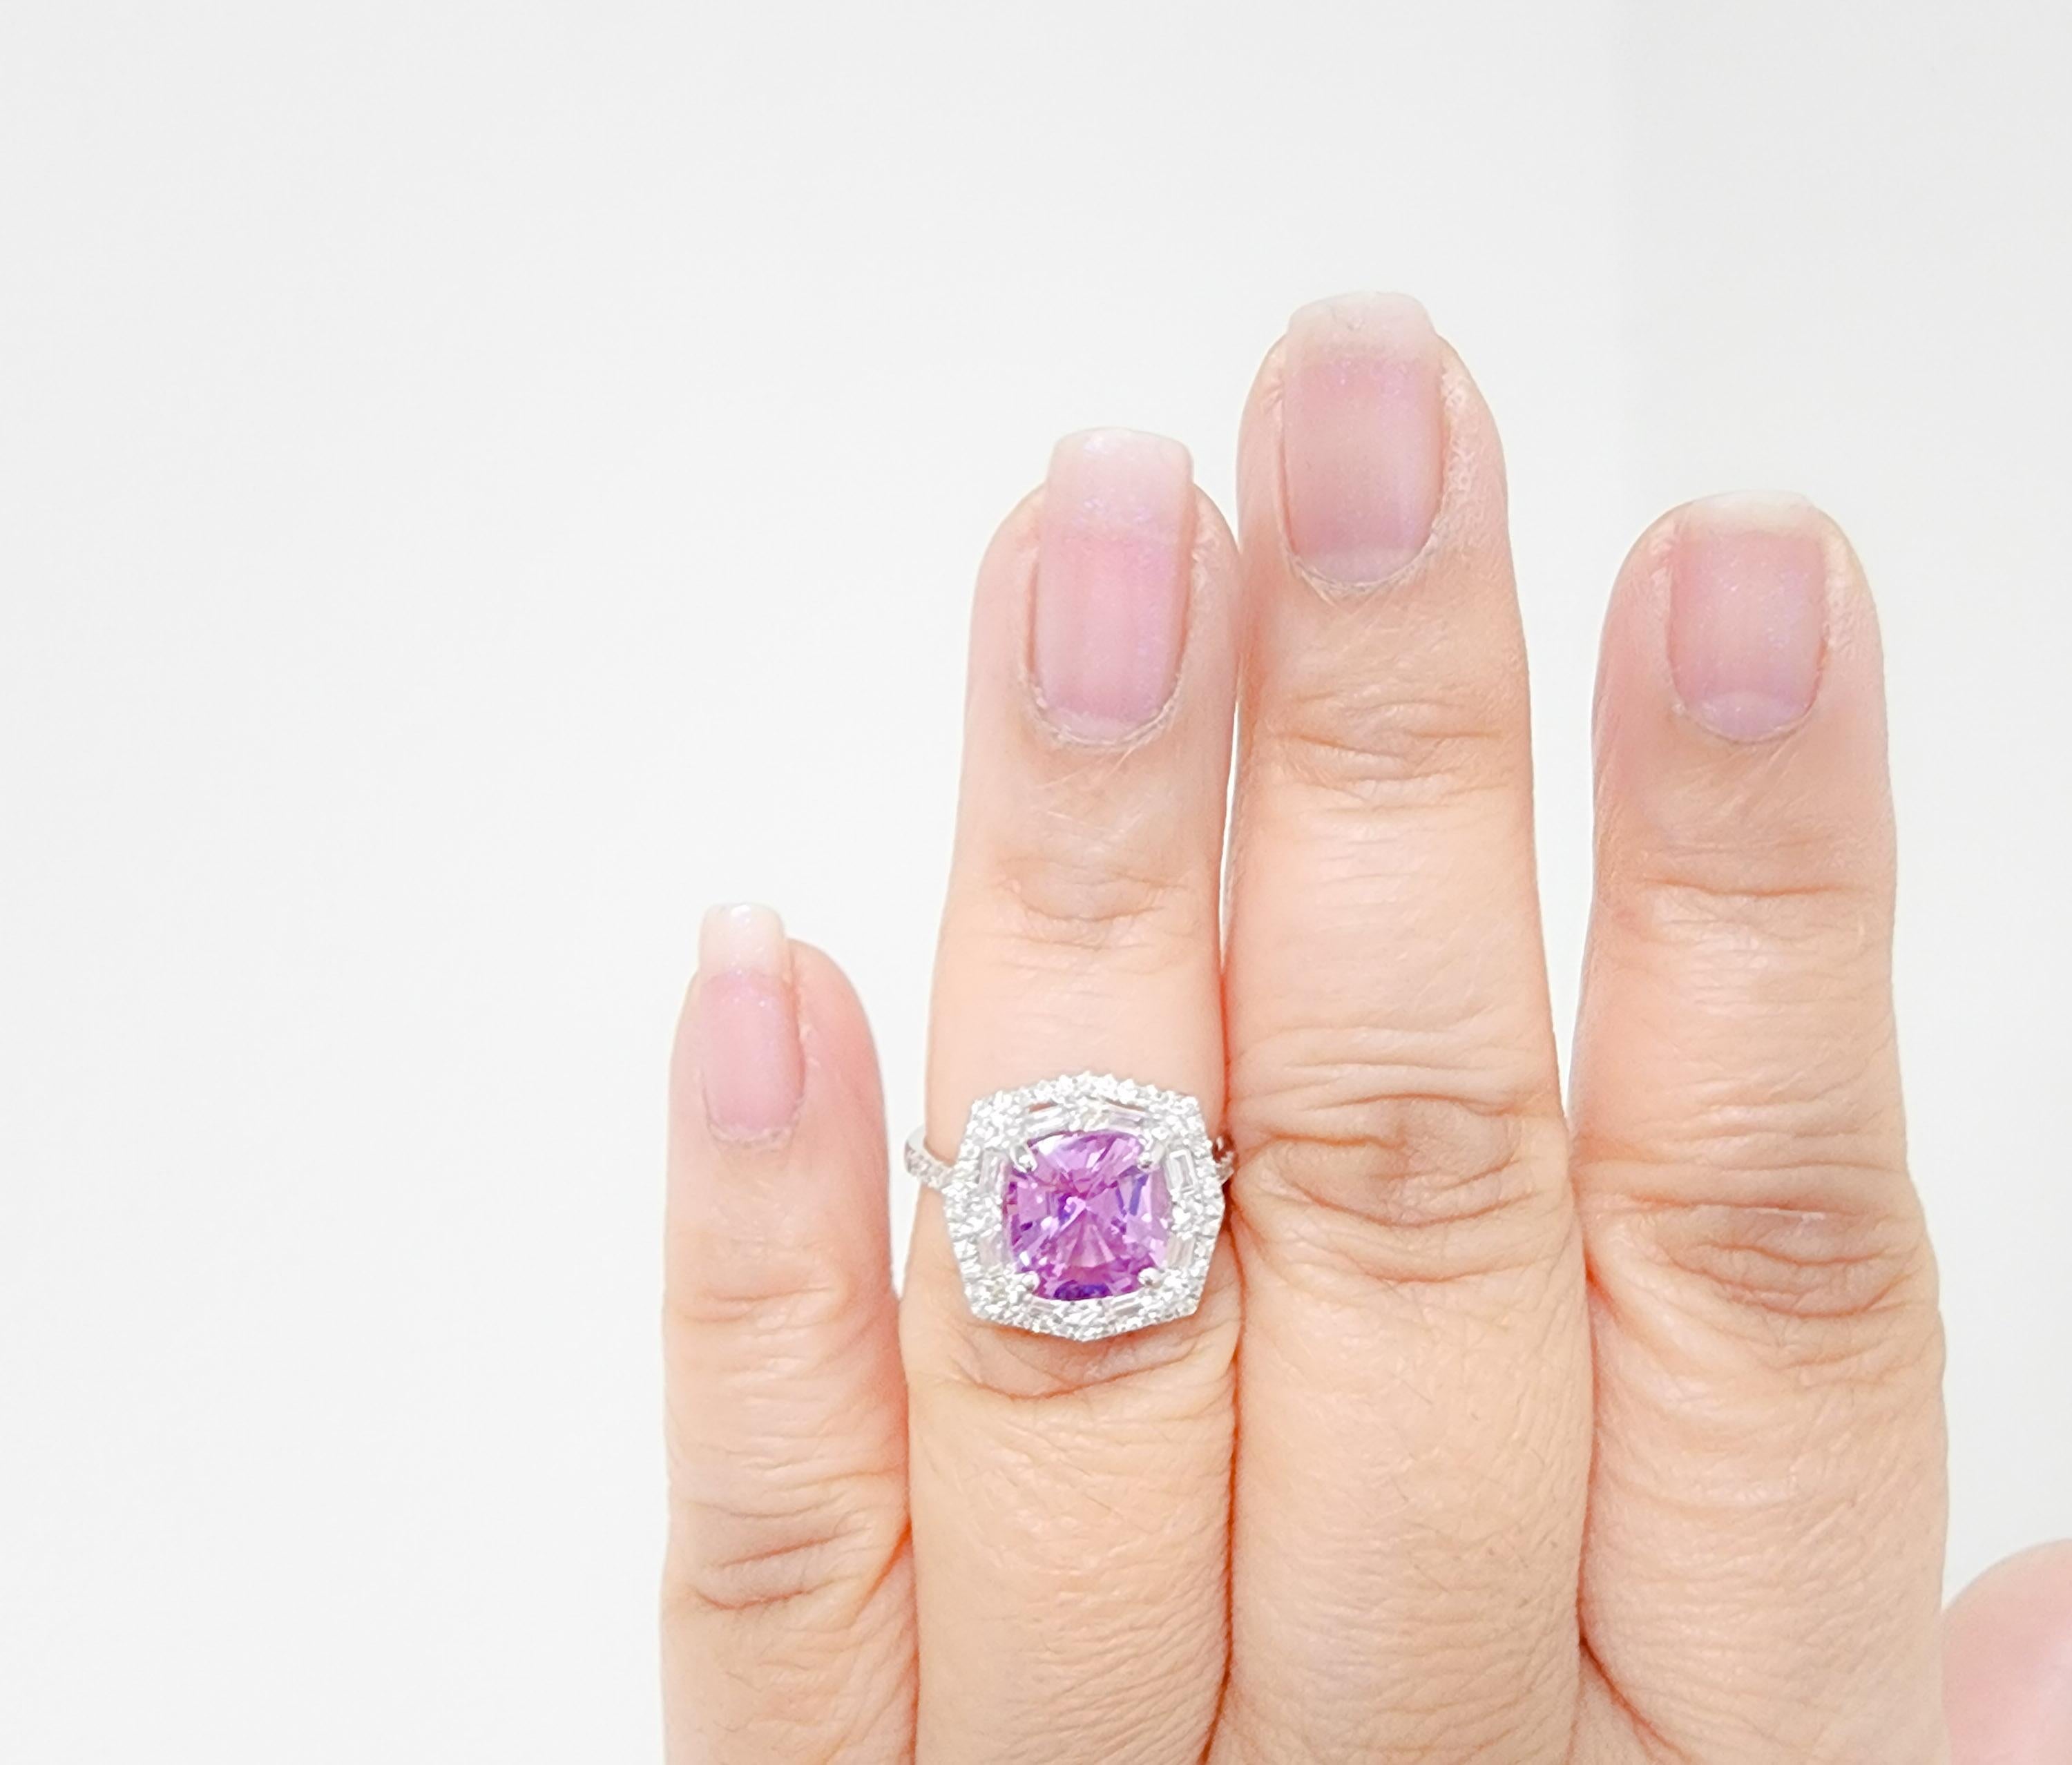 Beautiful 3.24 ct. unheated pink purple sapphire cushion with 0.68 ct. good quality white diamond rounds and baguettes.  Handmade in 14k white gold.  GIA certificate included.  Ring size 6.5.